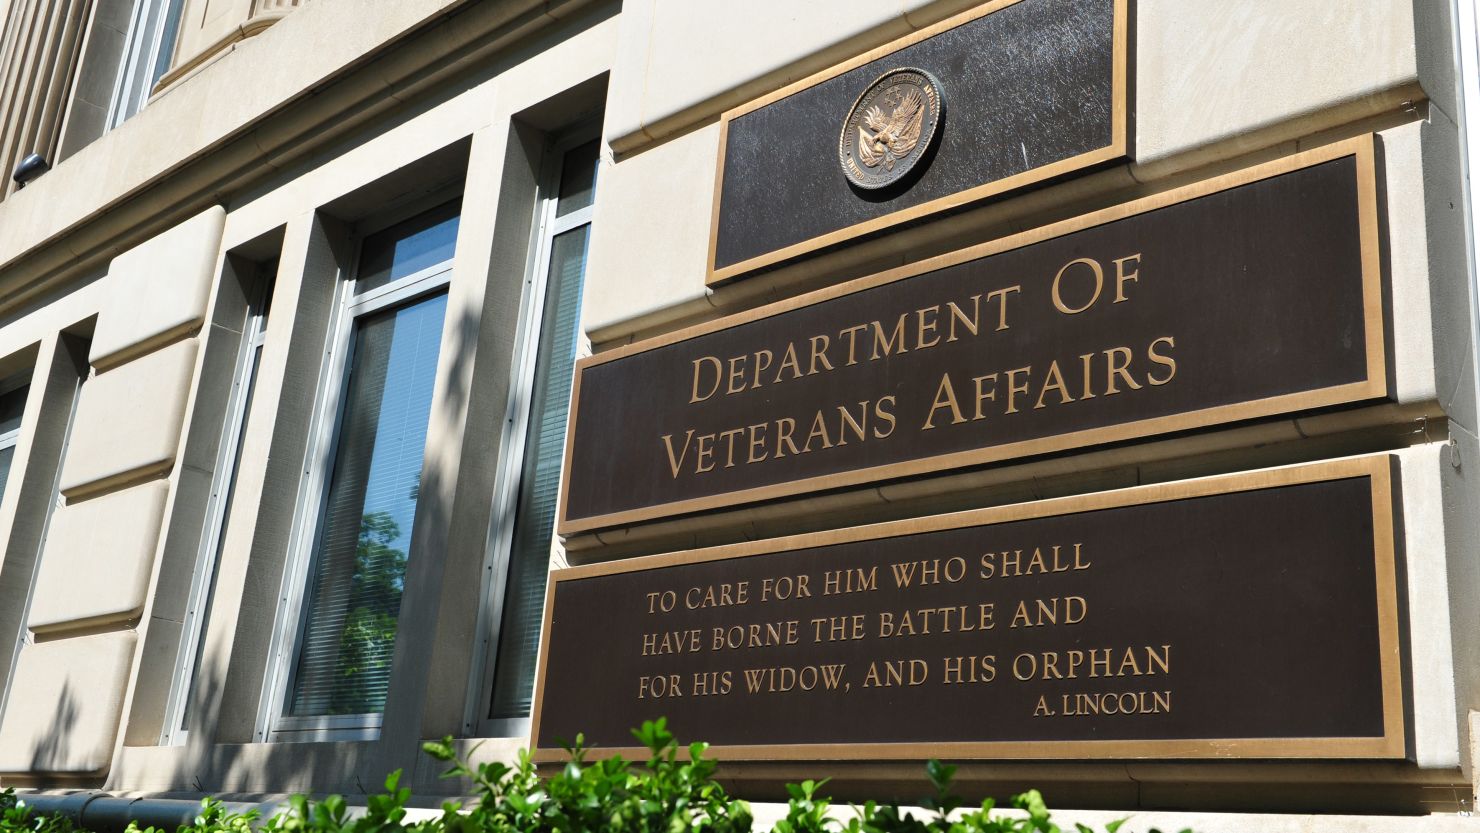 The chairman of the House Veterans Affairs Committee is accusing the VA of misleading Congress and the public by manipulating data.